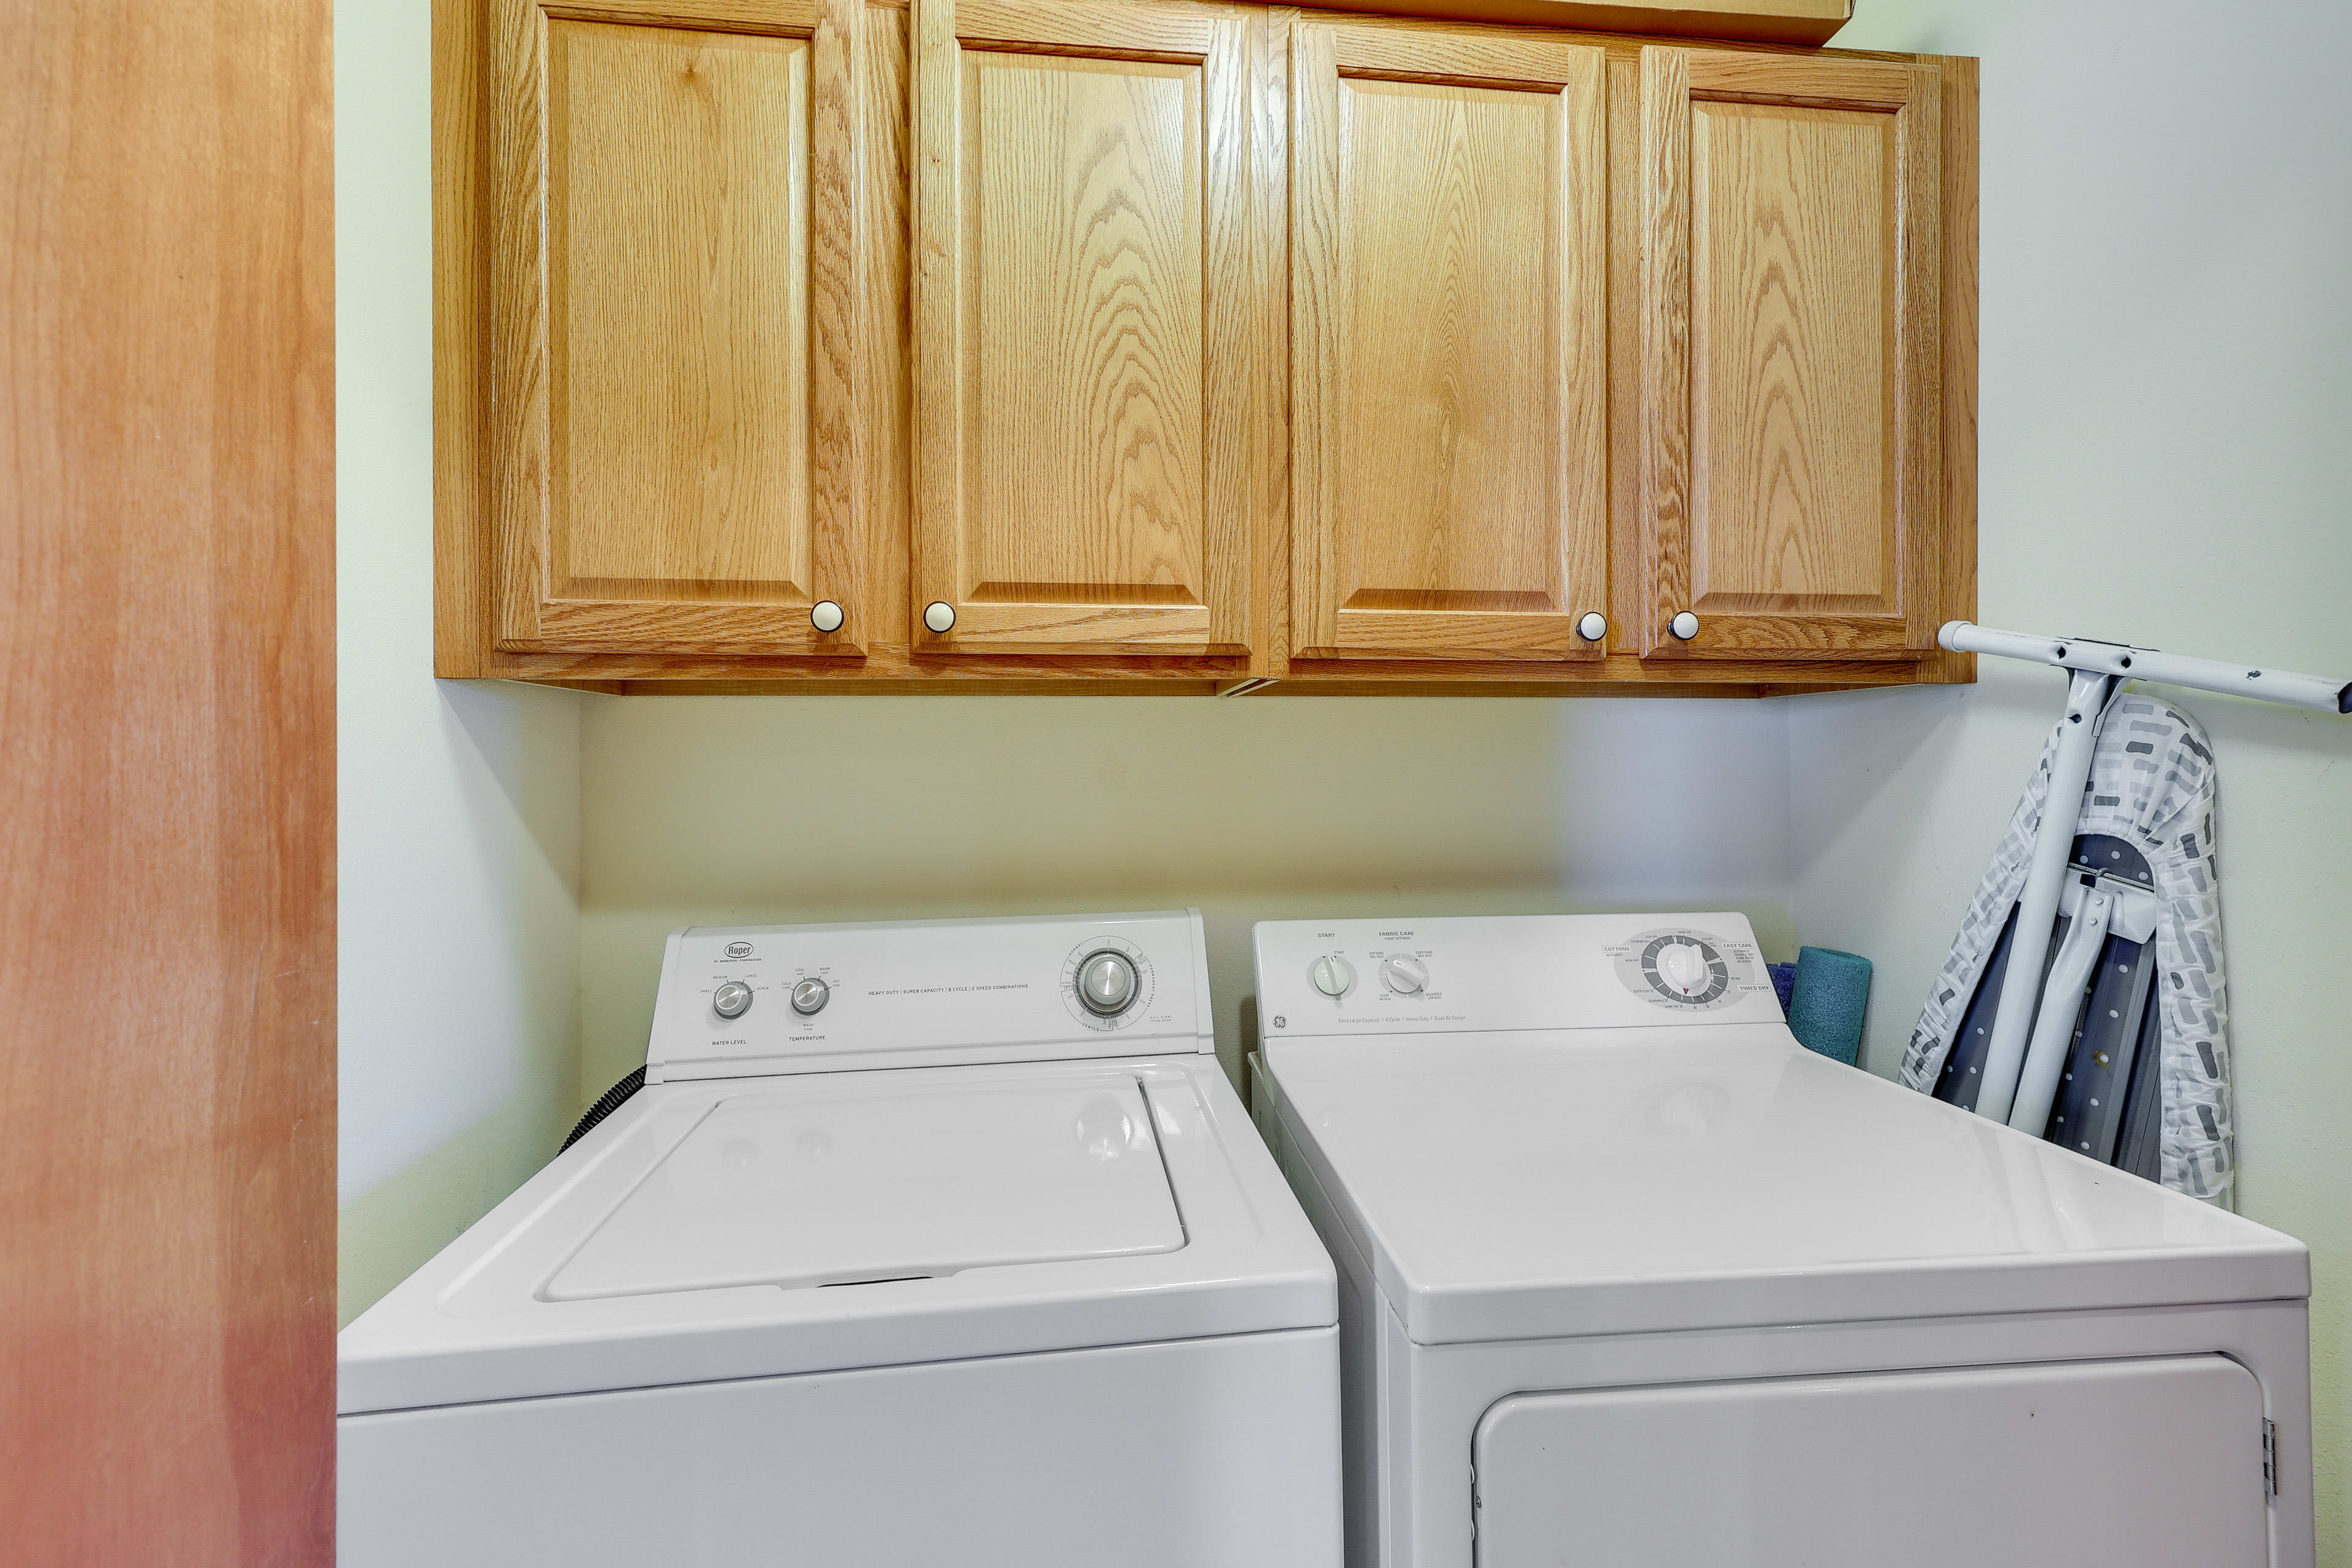 Washer & Dryer | Iron/Board | Detergent Provided